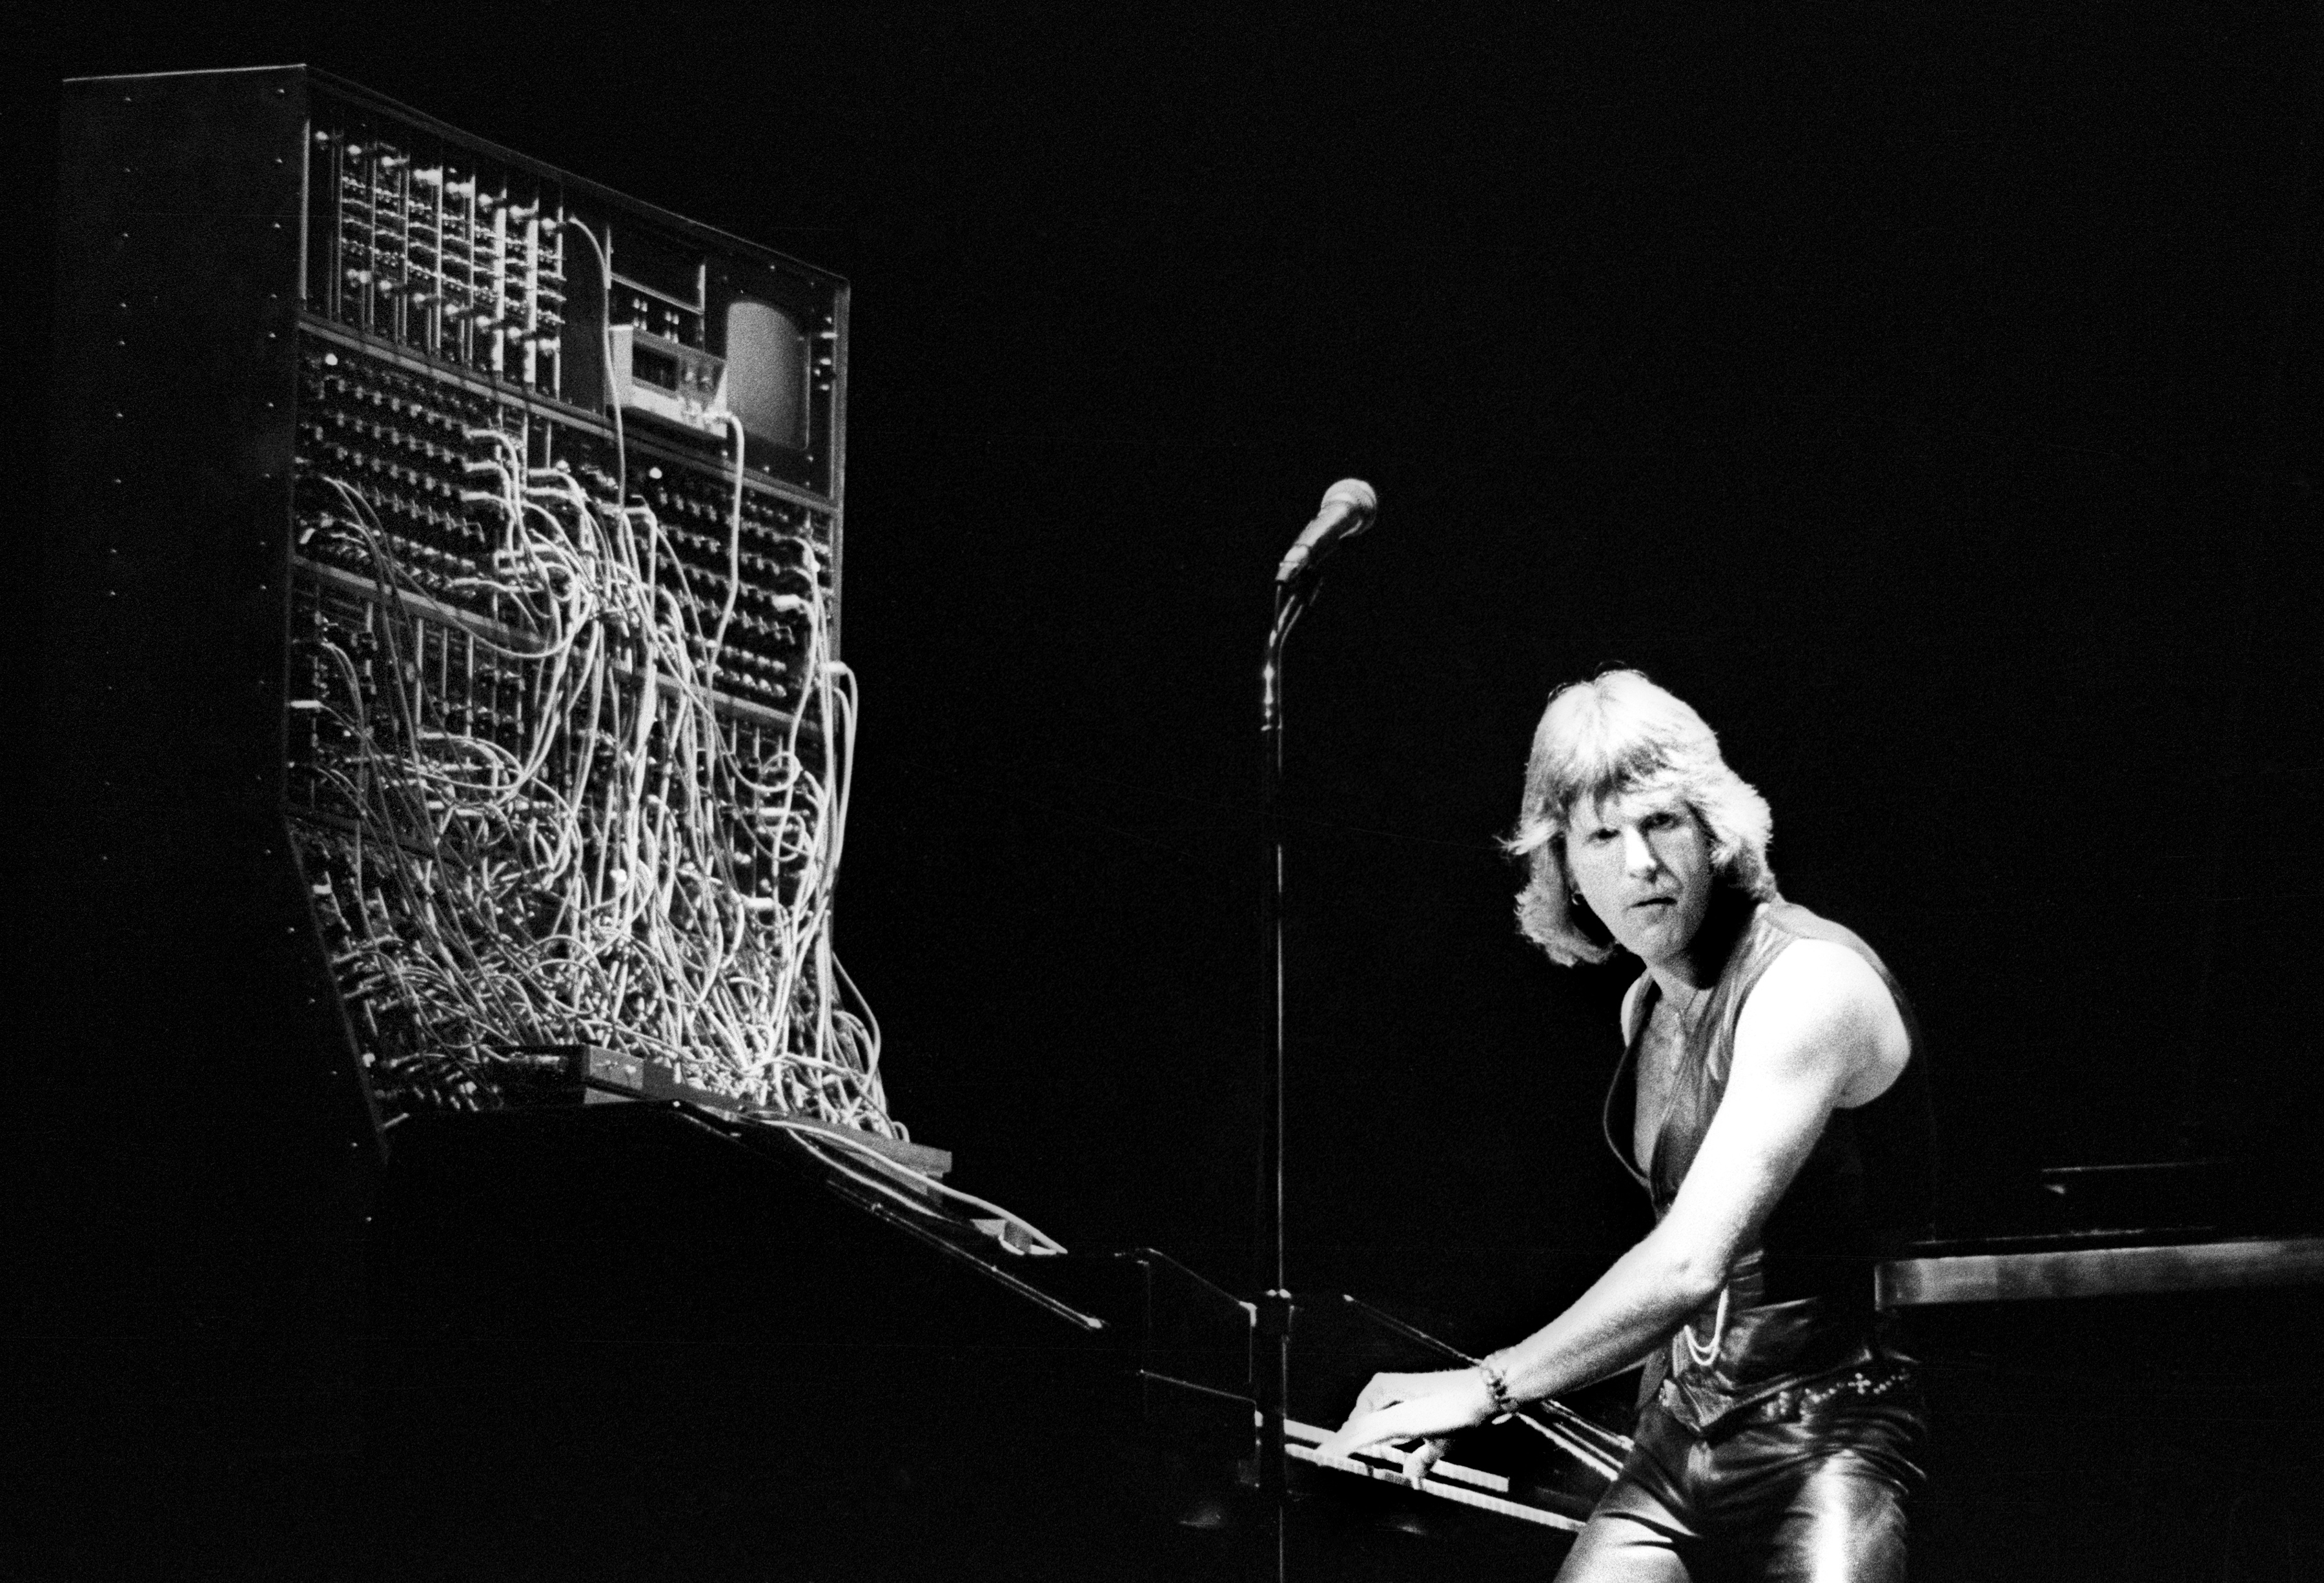 Keith Emerson performs with Emerson, Lake and Palmer at Oakland Coliseum Arena on August 1977 in Oakland, California. (Keith Emerson passed today at 71 years. RIP Keith.) [3600 × 2452]: HistoryPorn